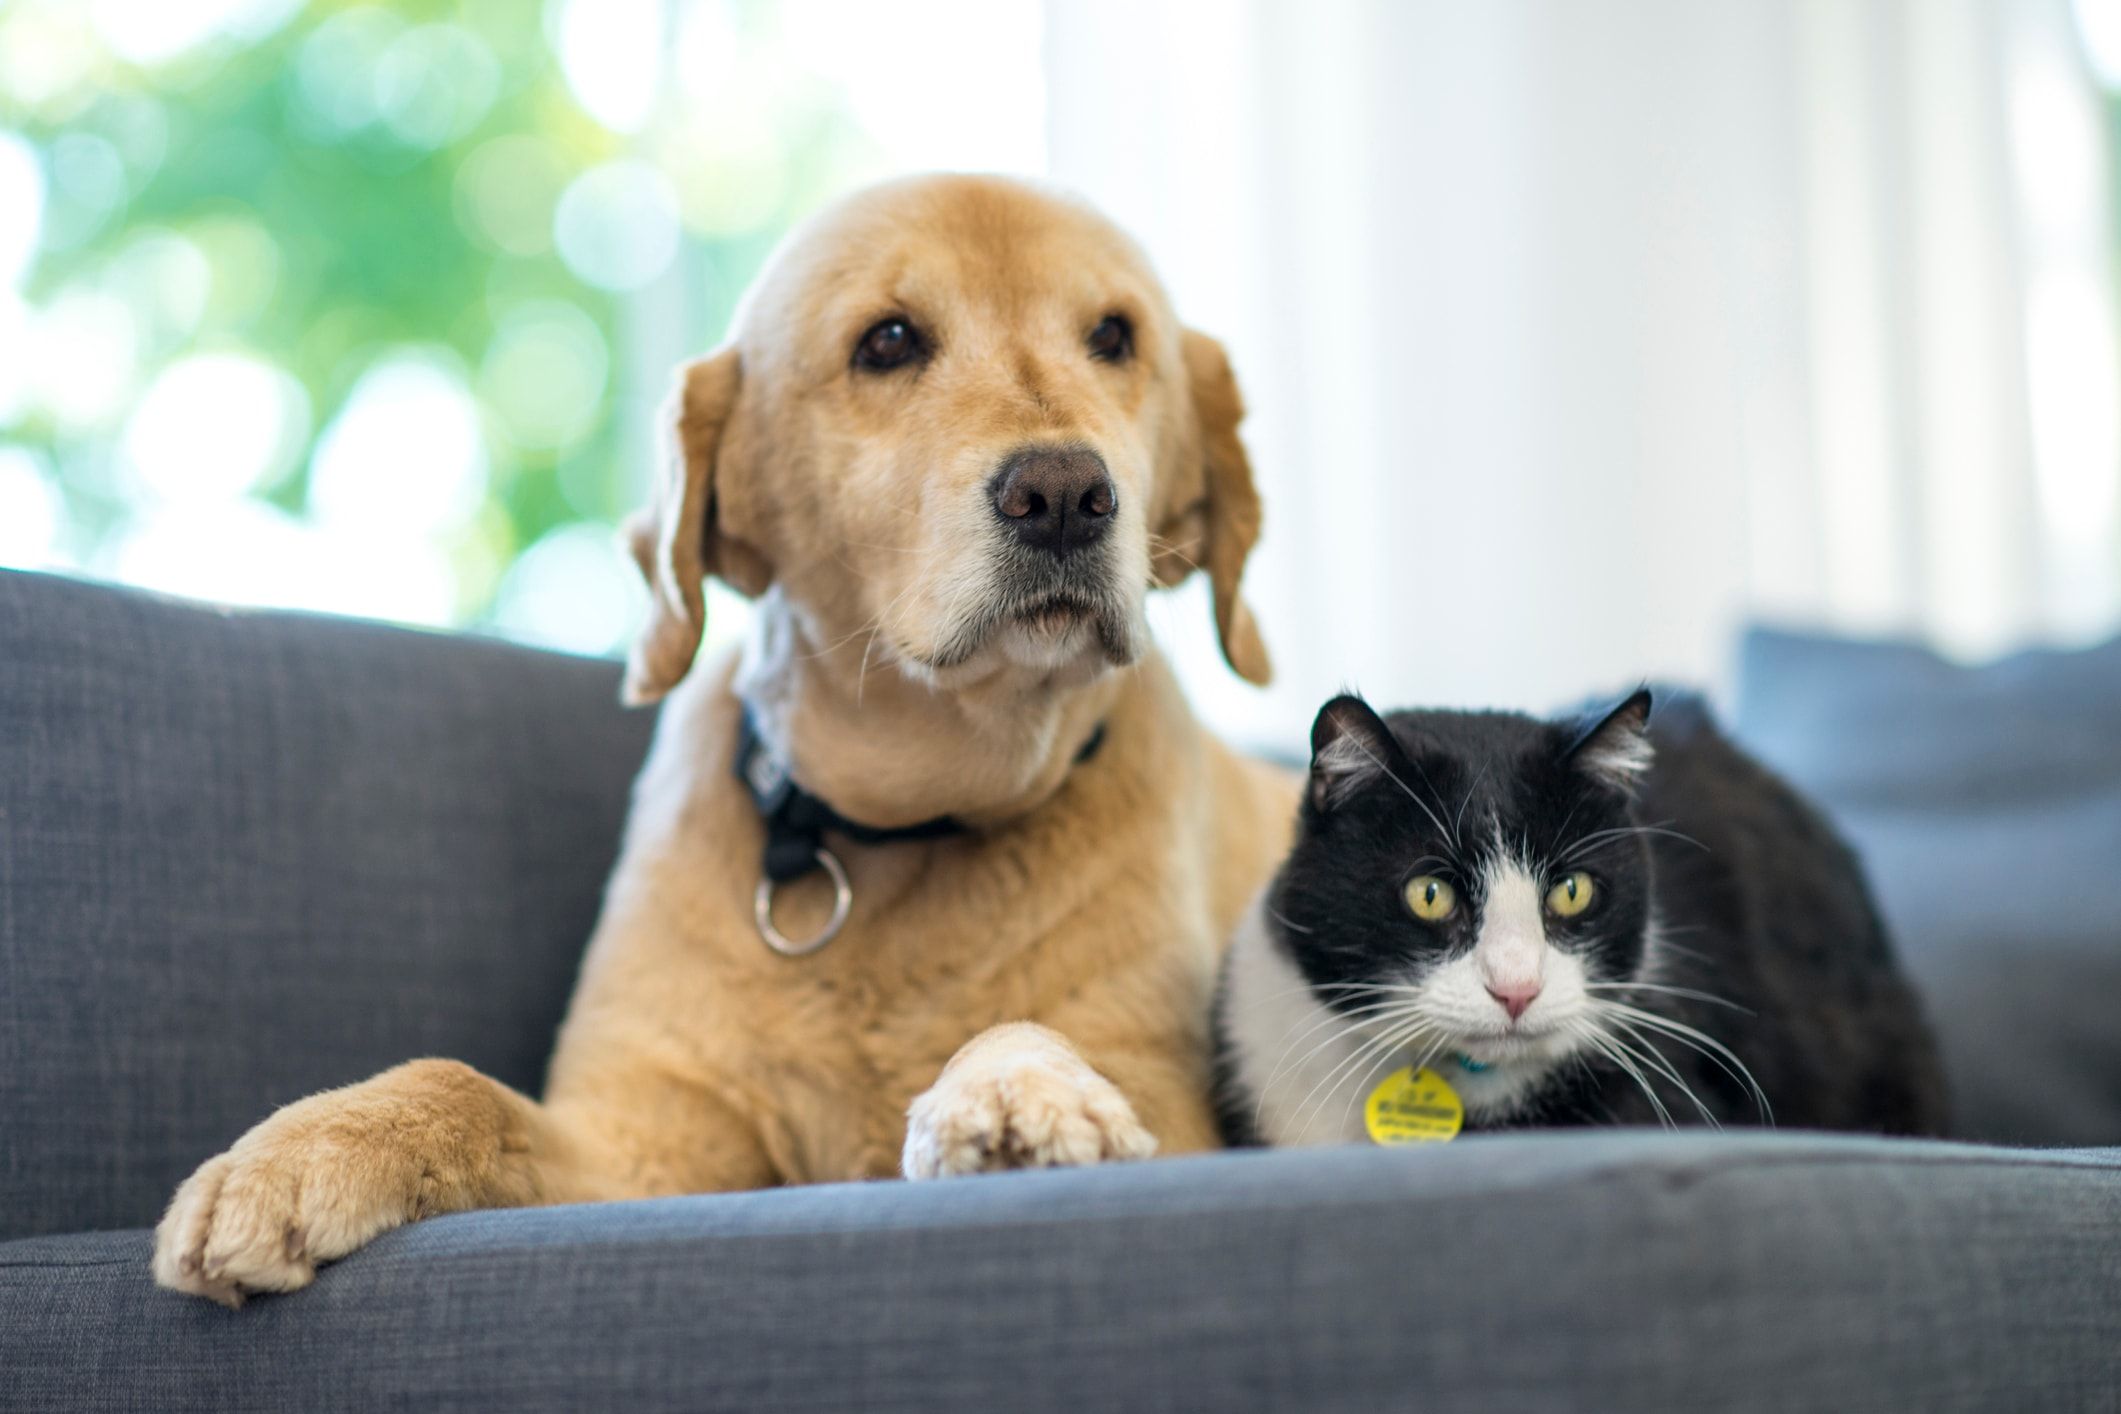 Dog and cat experiencing separation anxiety post-pandemic